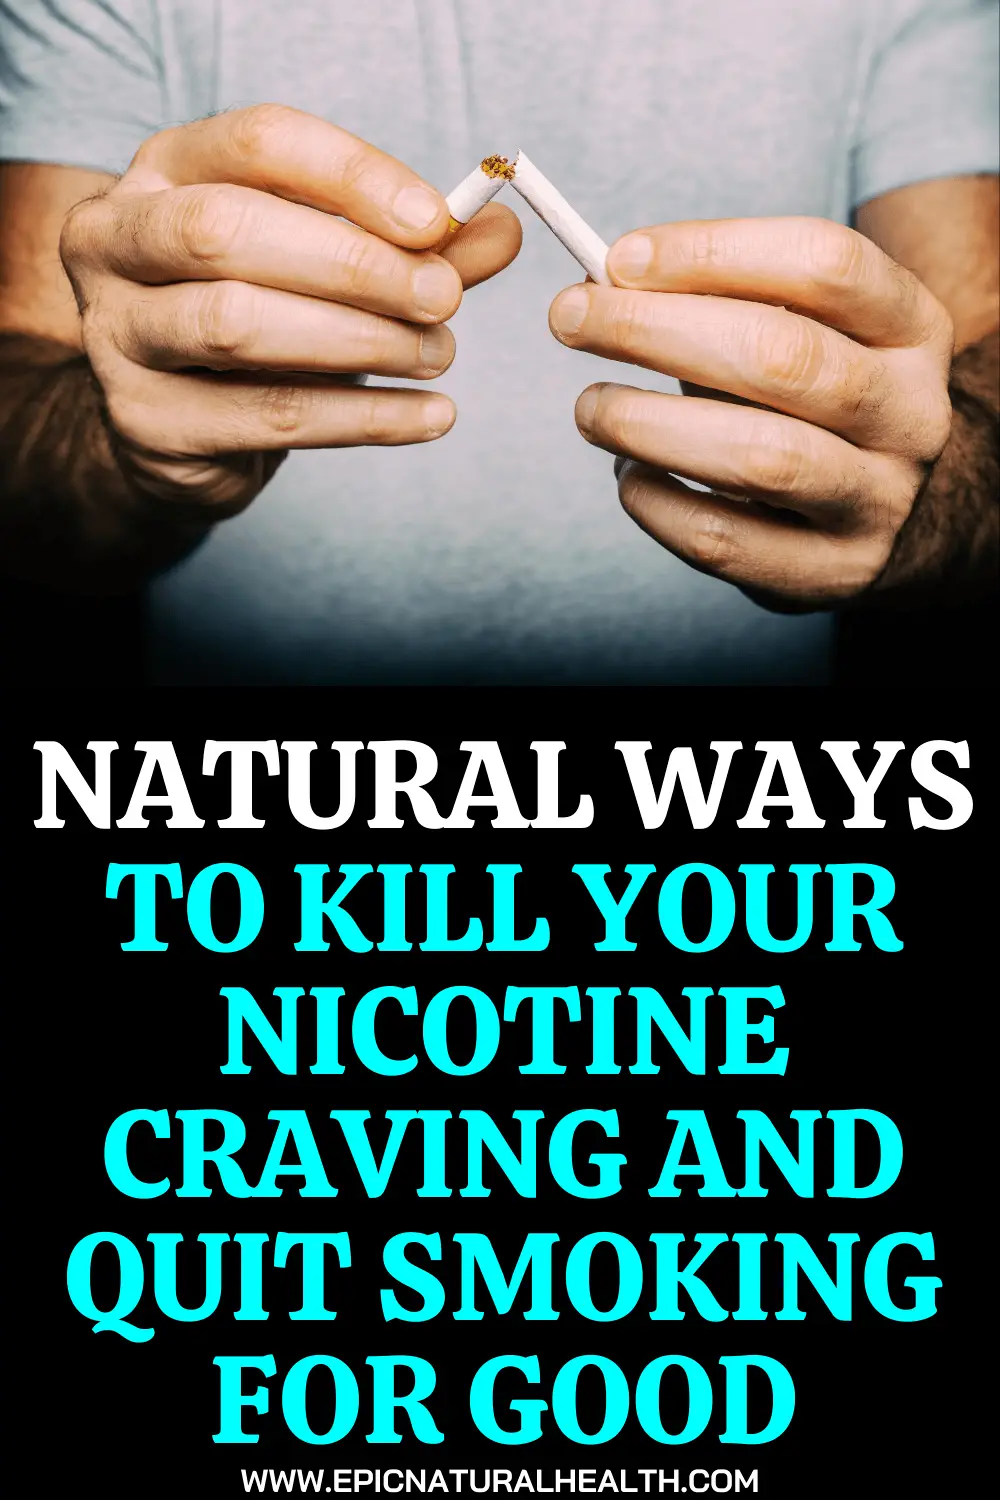 Natural Ways to Kill Your Nicotine Craving and Quit Smoking for Good